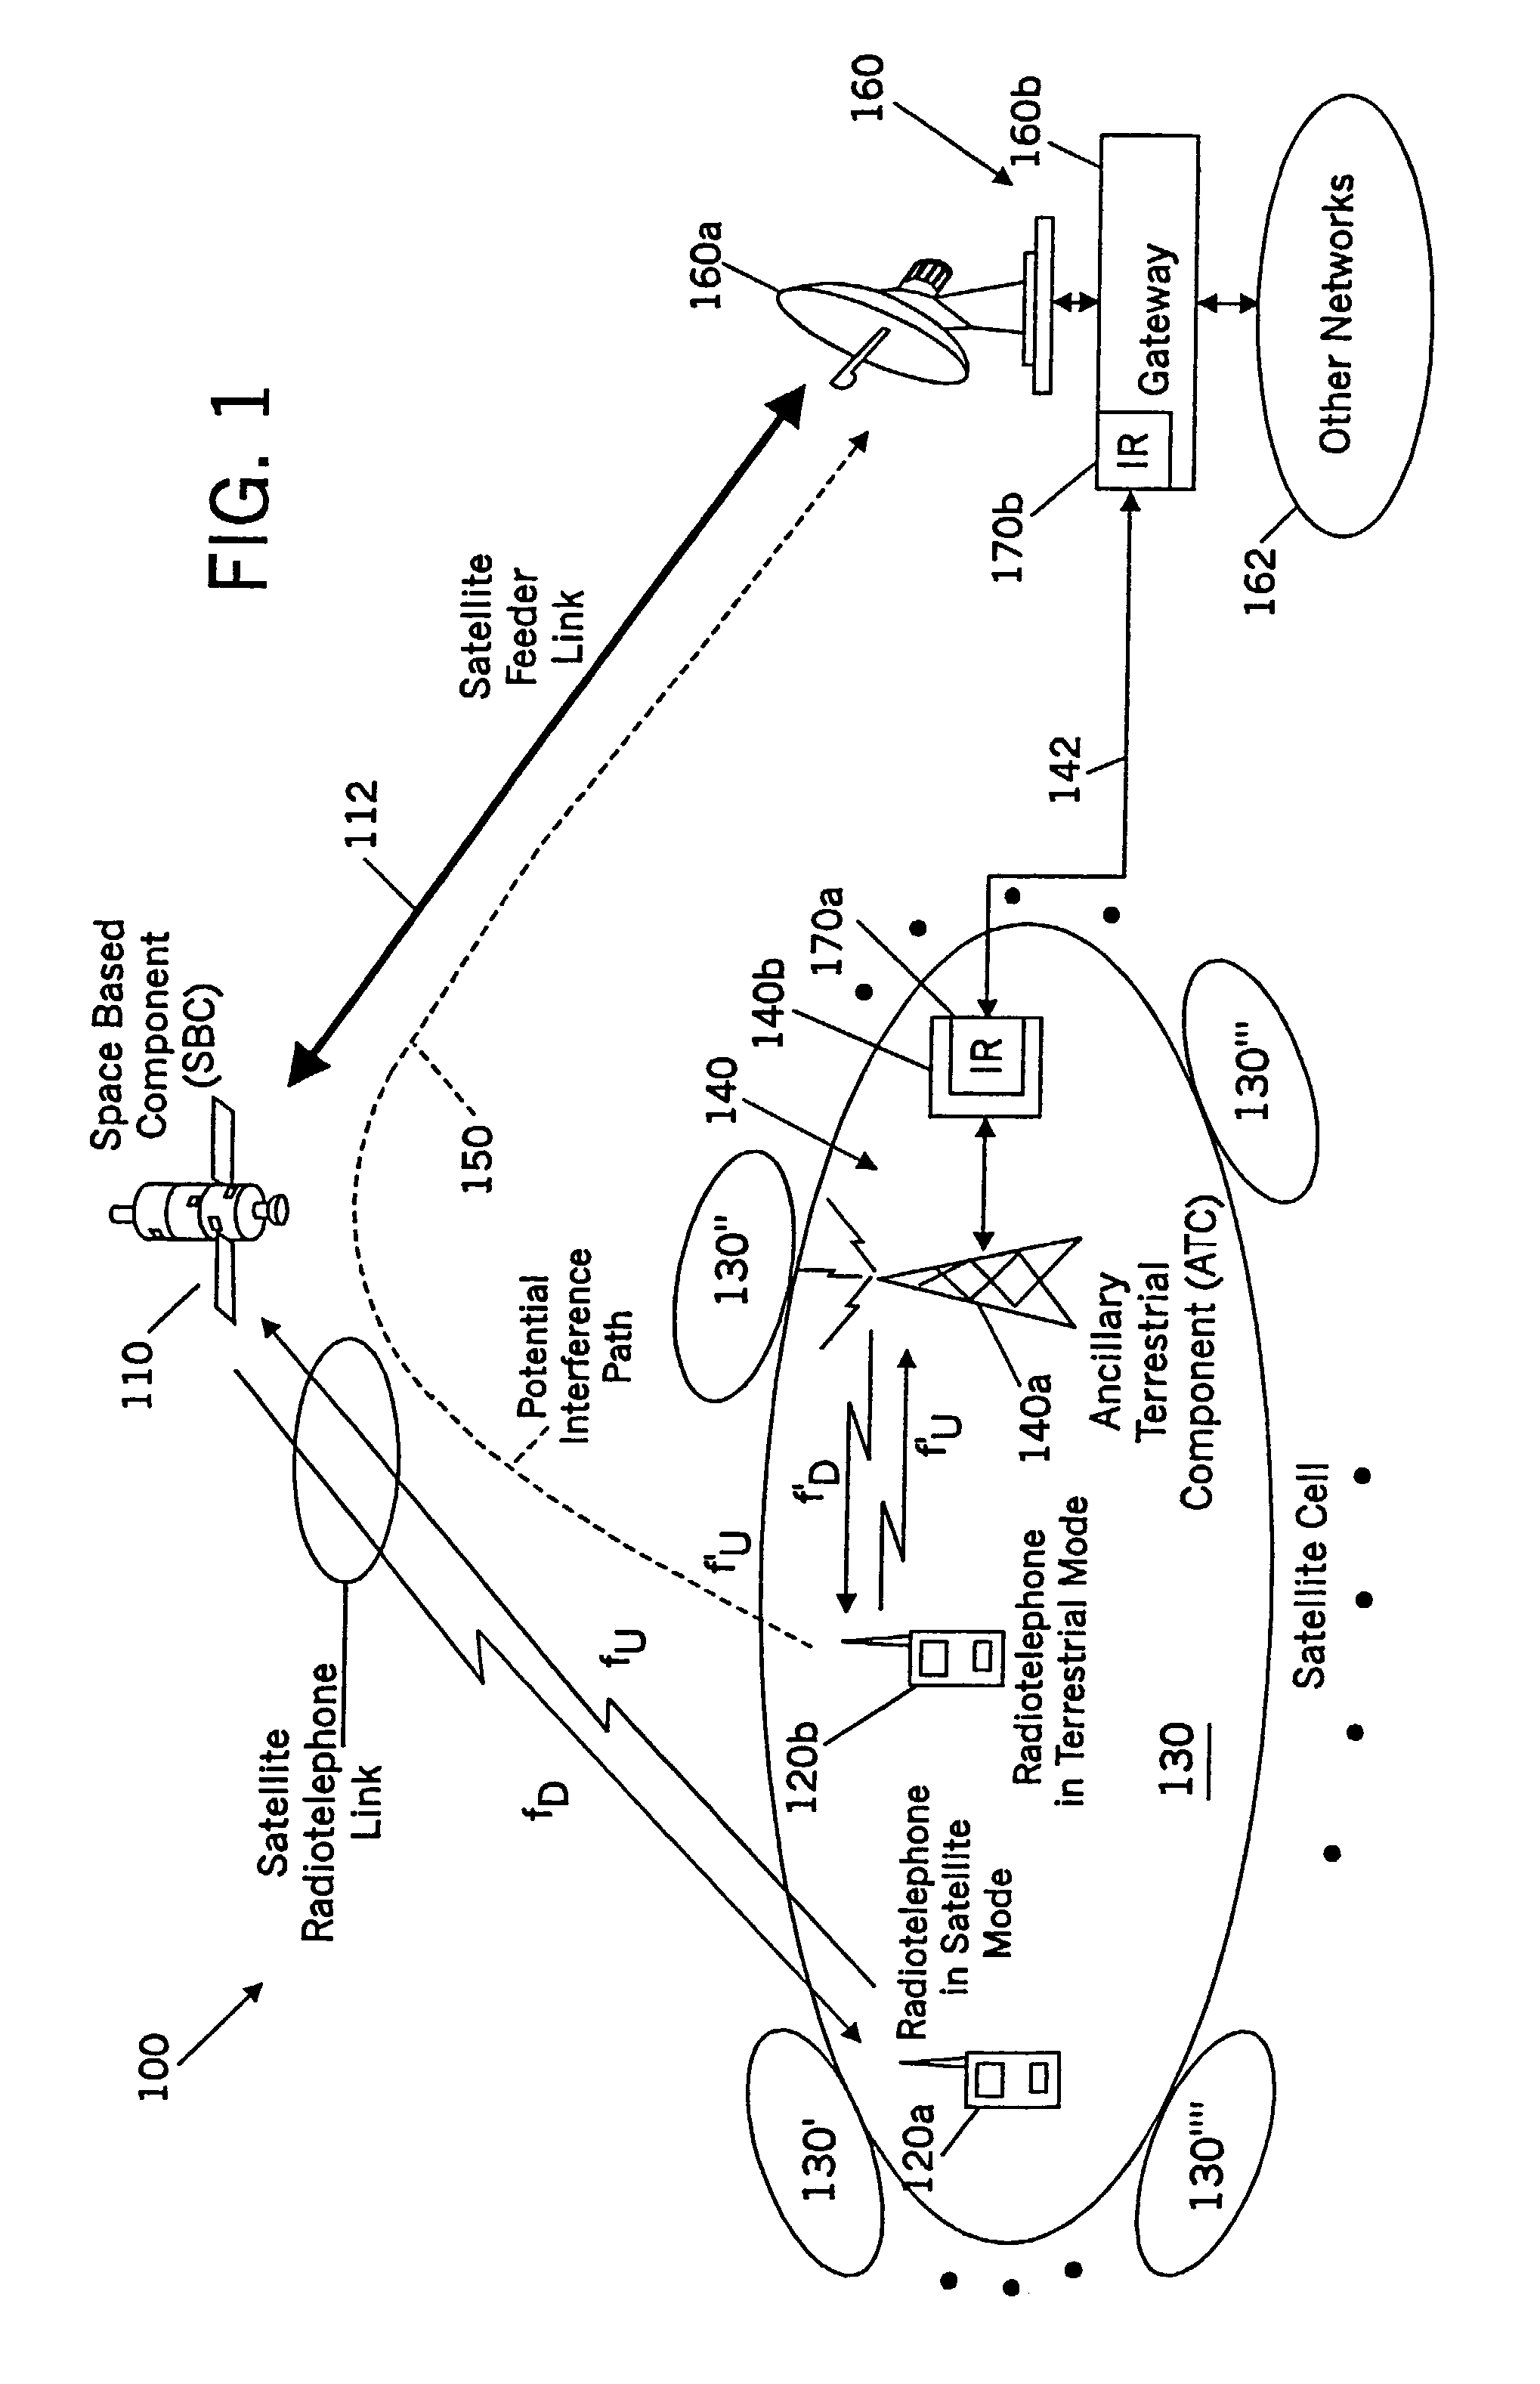 Additional systems and methods for monitoring terrestrially reused satellite frequencies to reduce potential interference